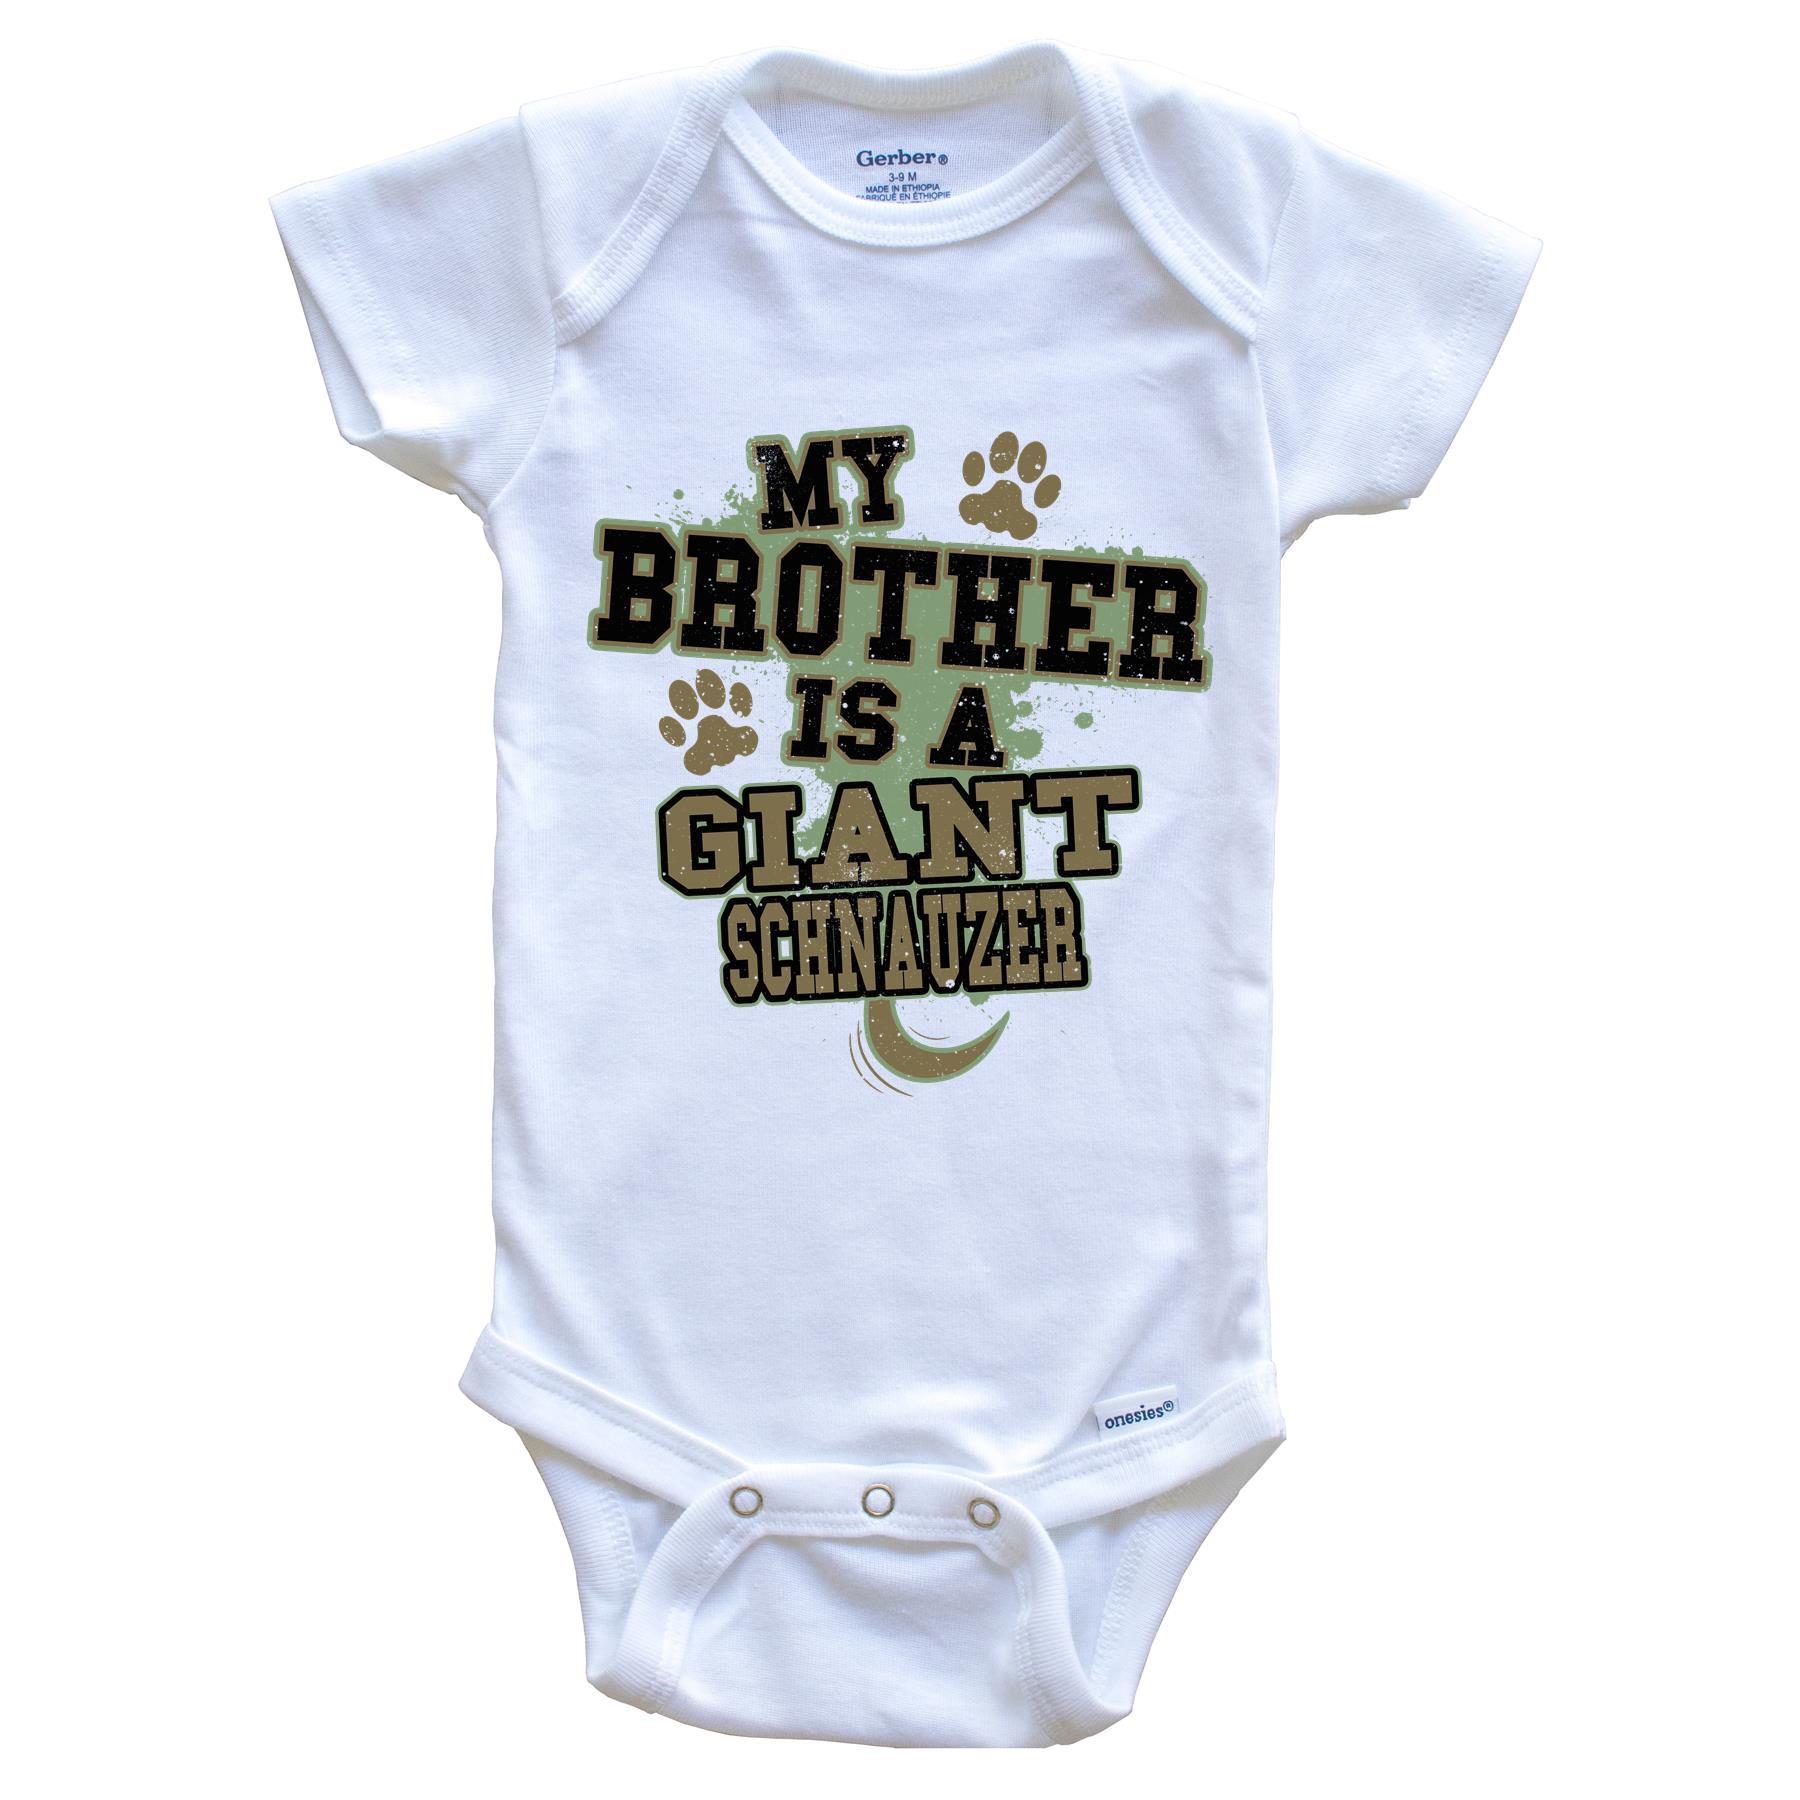 My Brother Is A Giant Schnauzer Funny Dog Baby Onesie